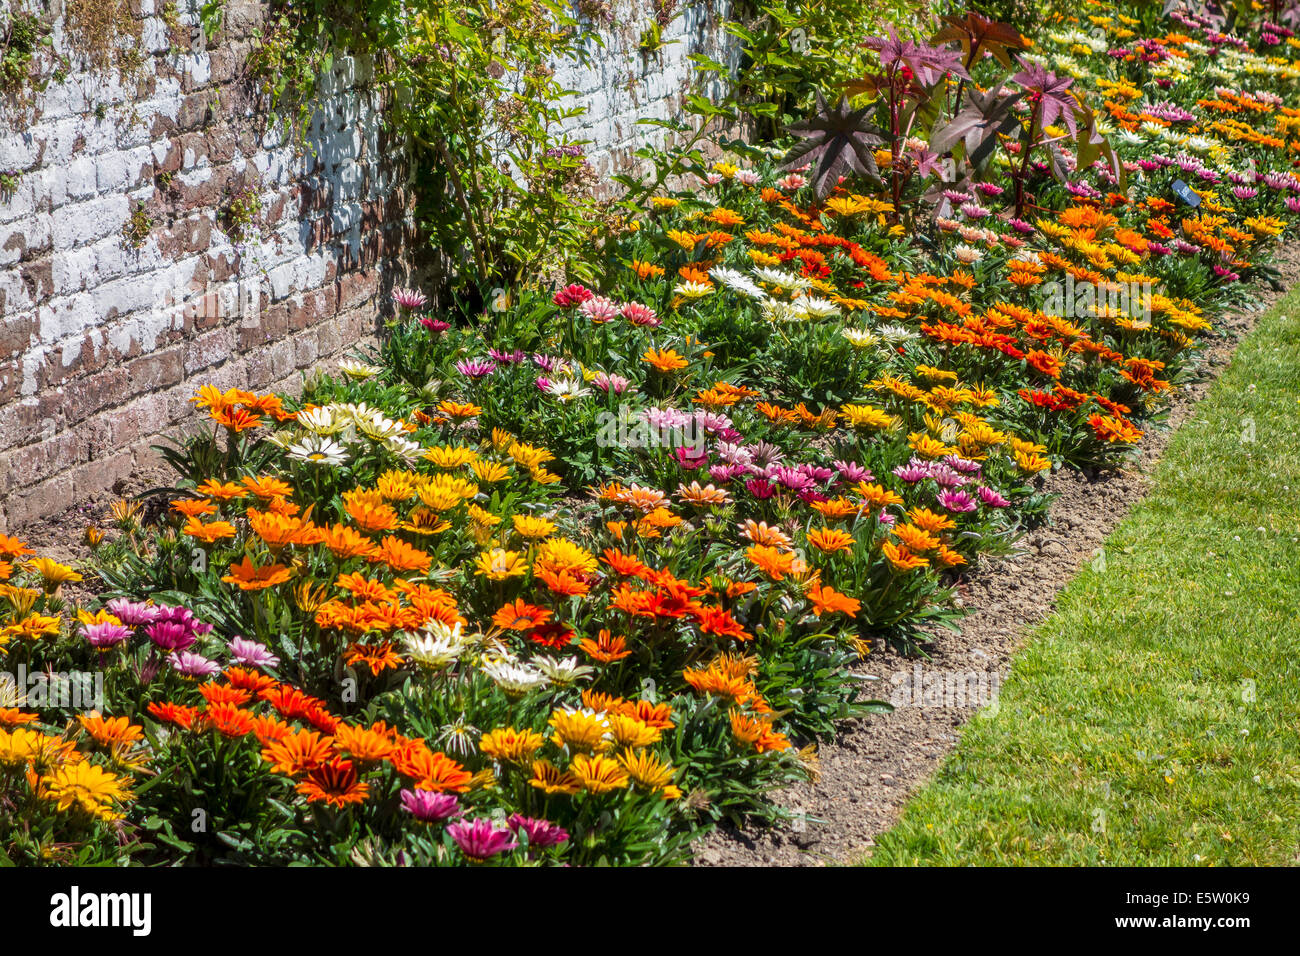 Colorful Colourful Daisy Bed Border gardening Stock Photo